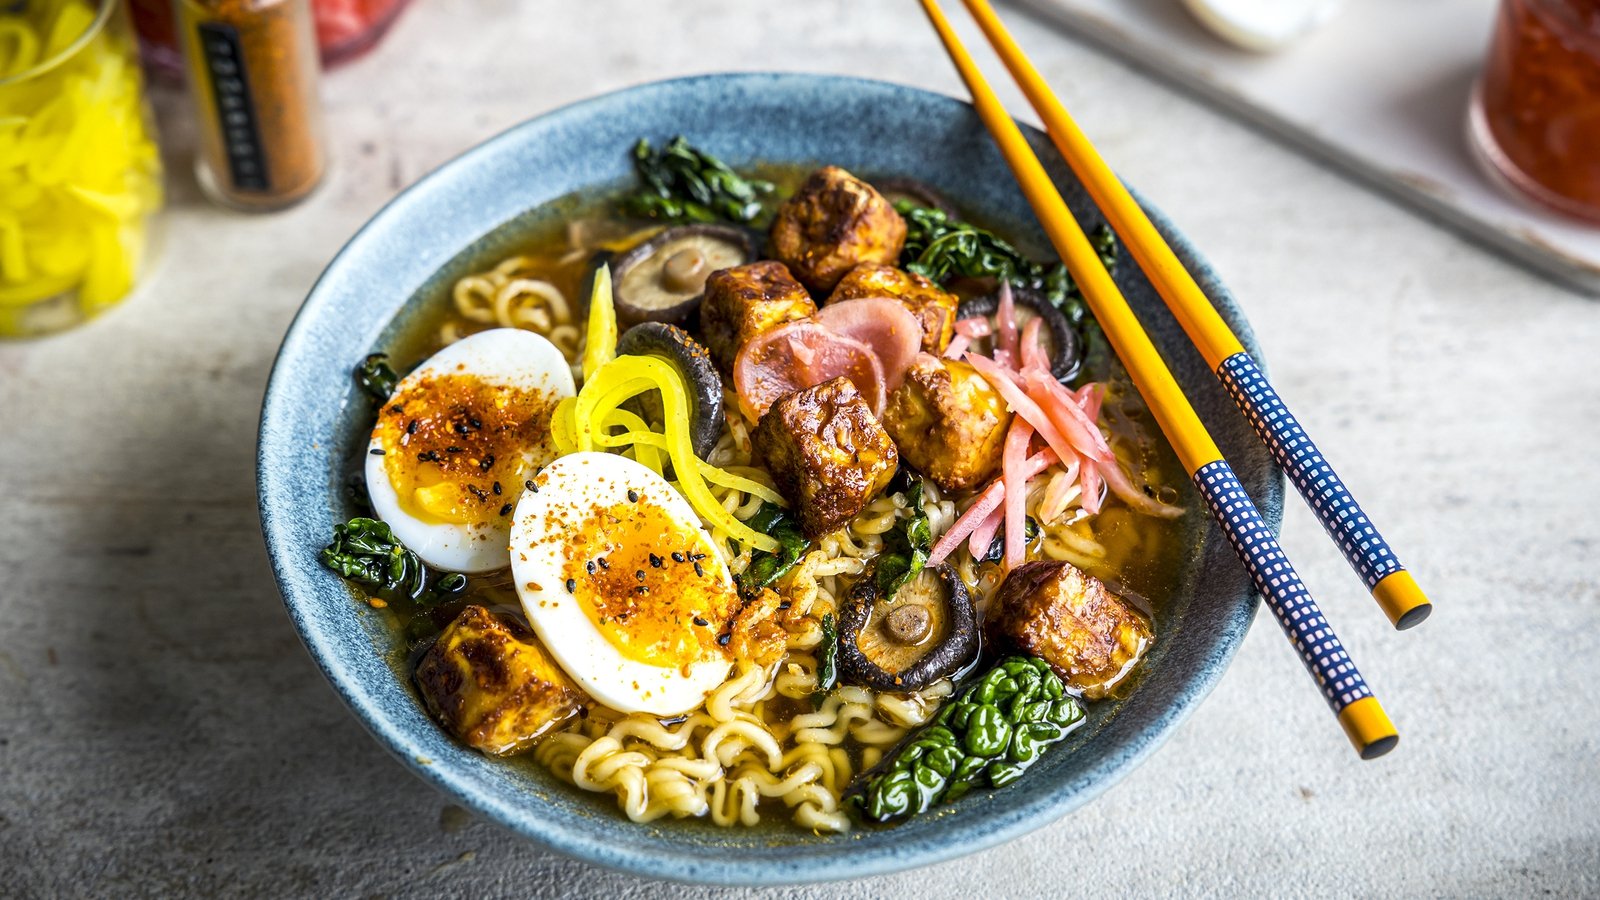 Donal's instant noodle ramen with air fryer tofu